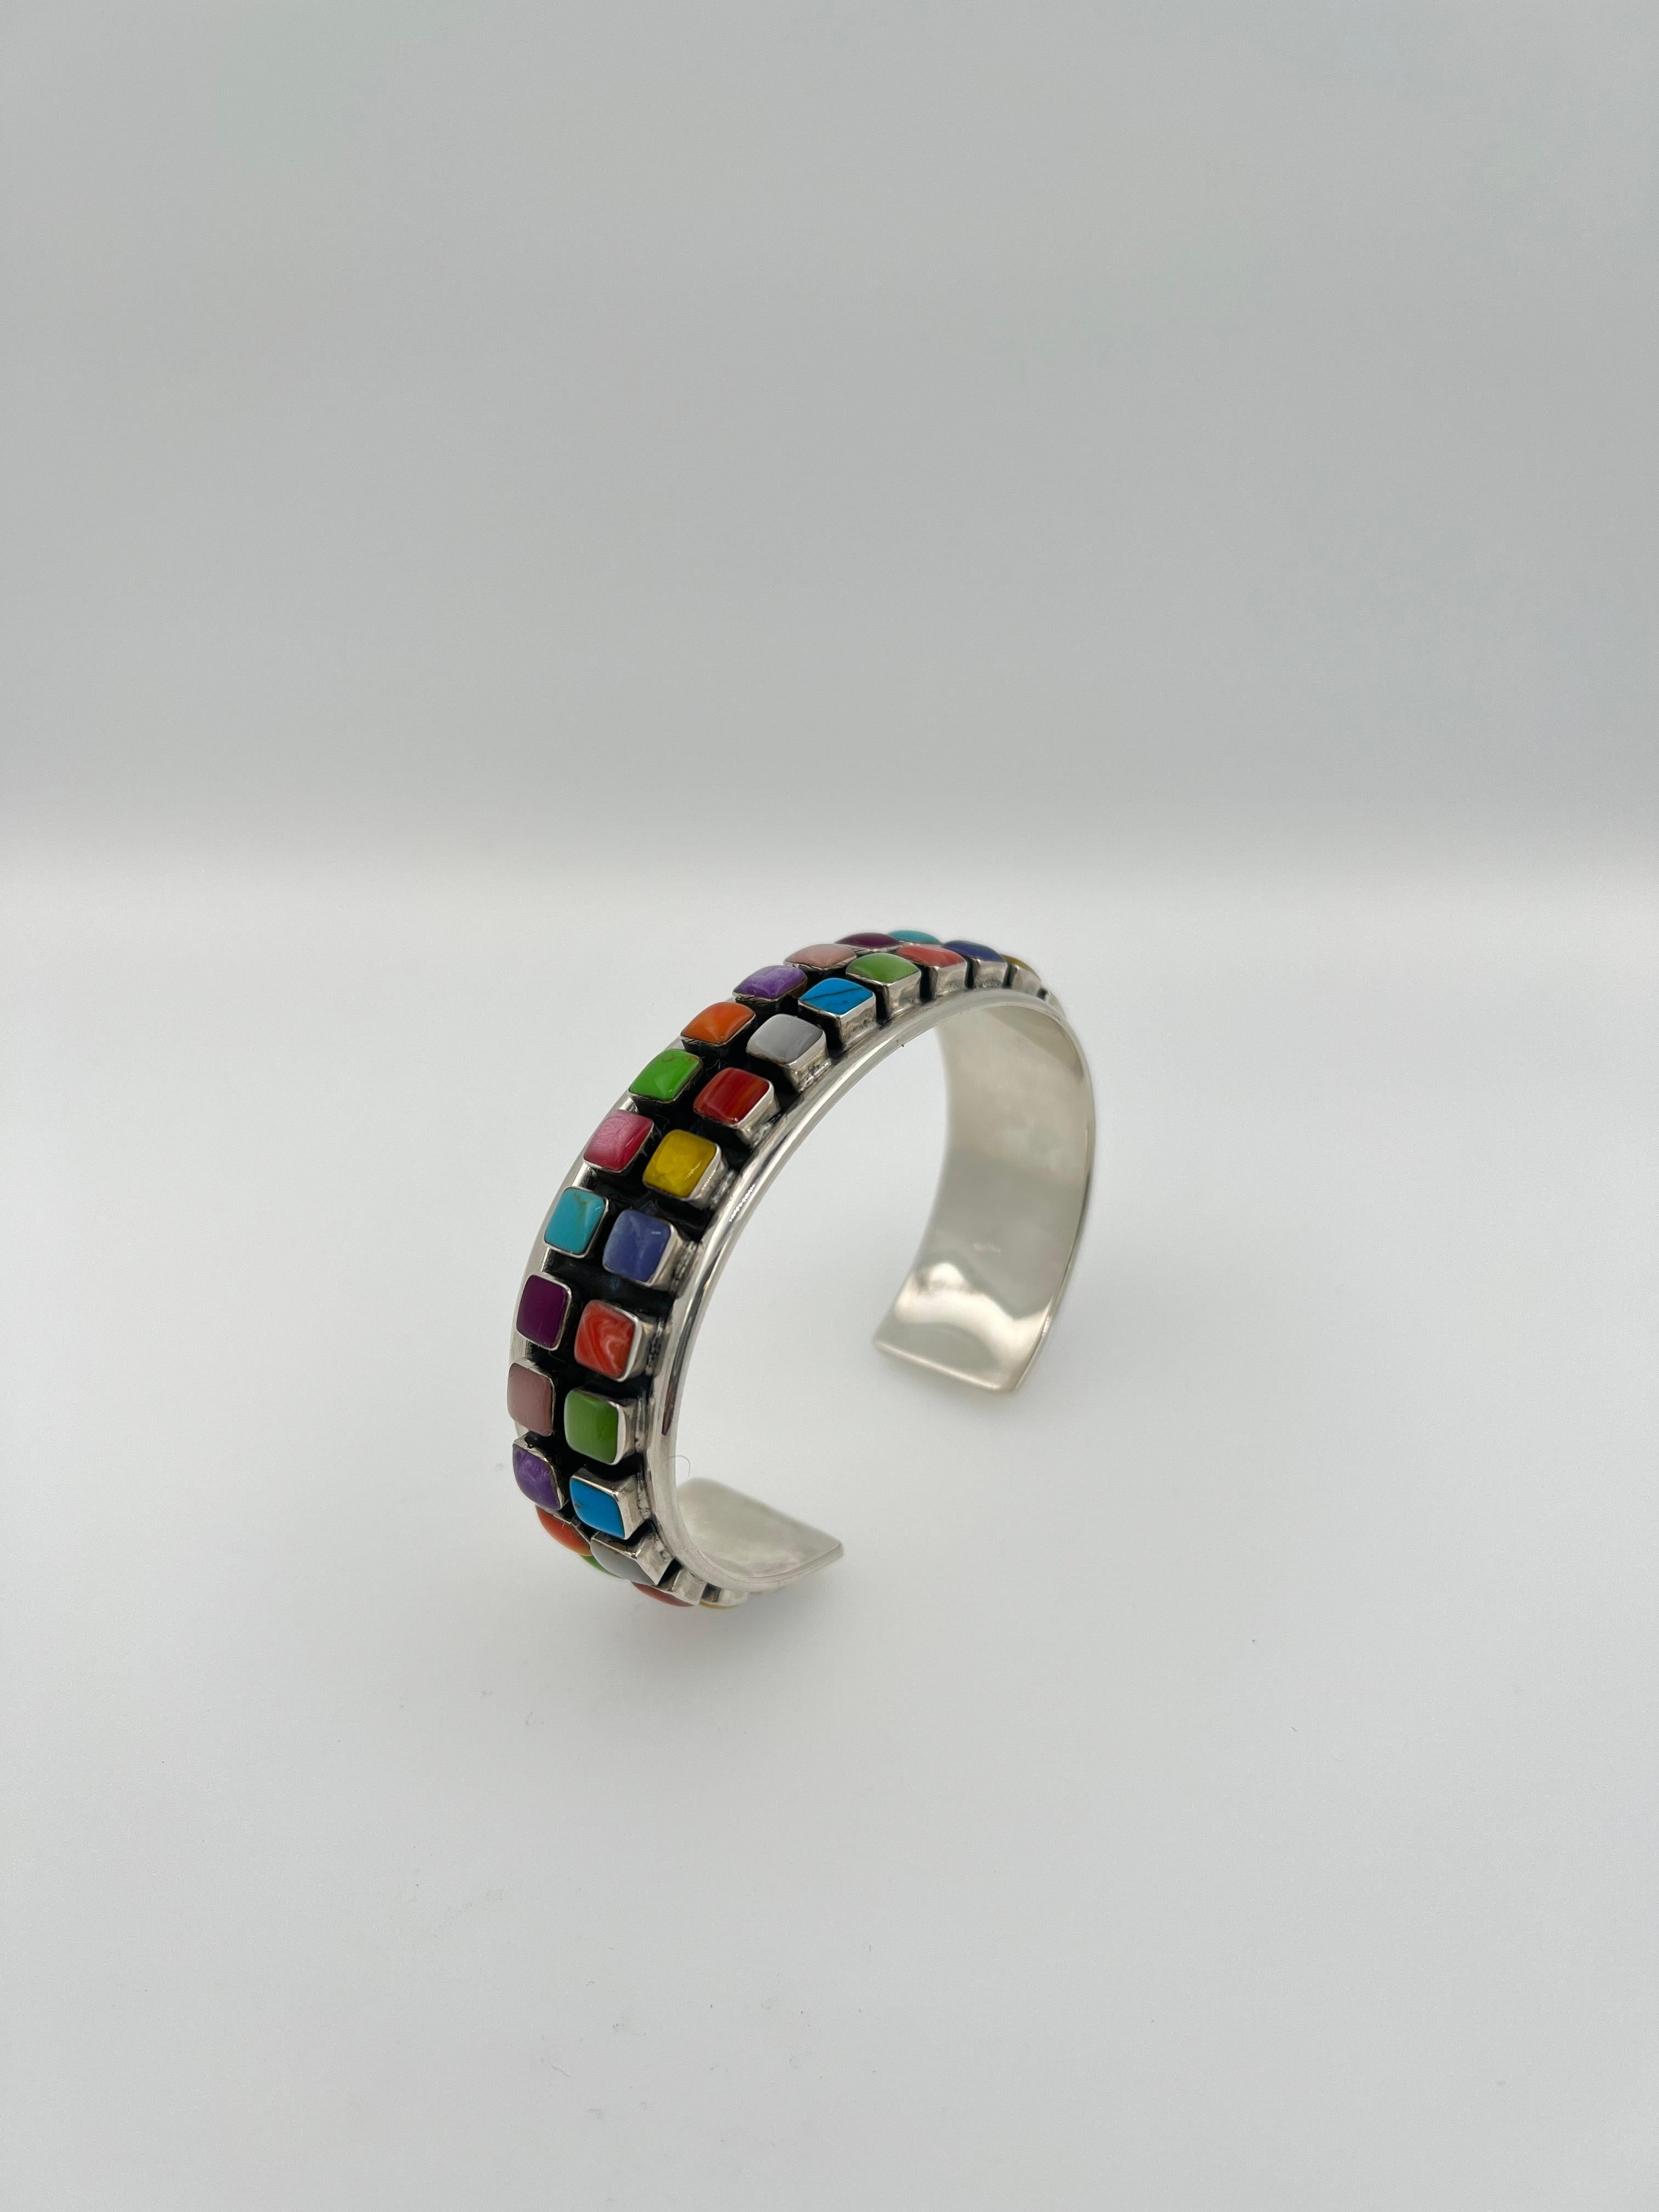 Geometric Colored Rainbow Cab Gemstone Sterling Silver Wide Cuff Bangle Bracelet For Sale 5